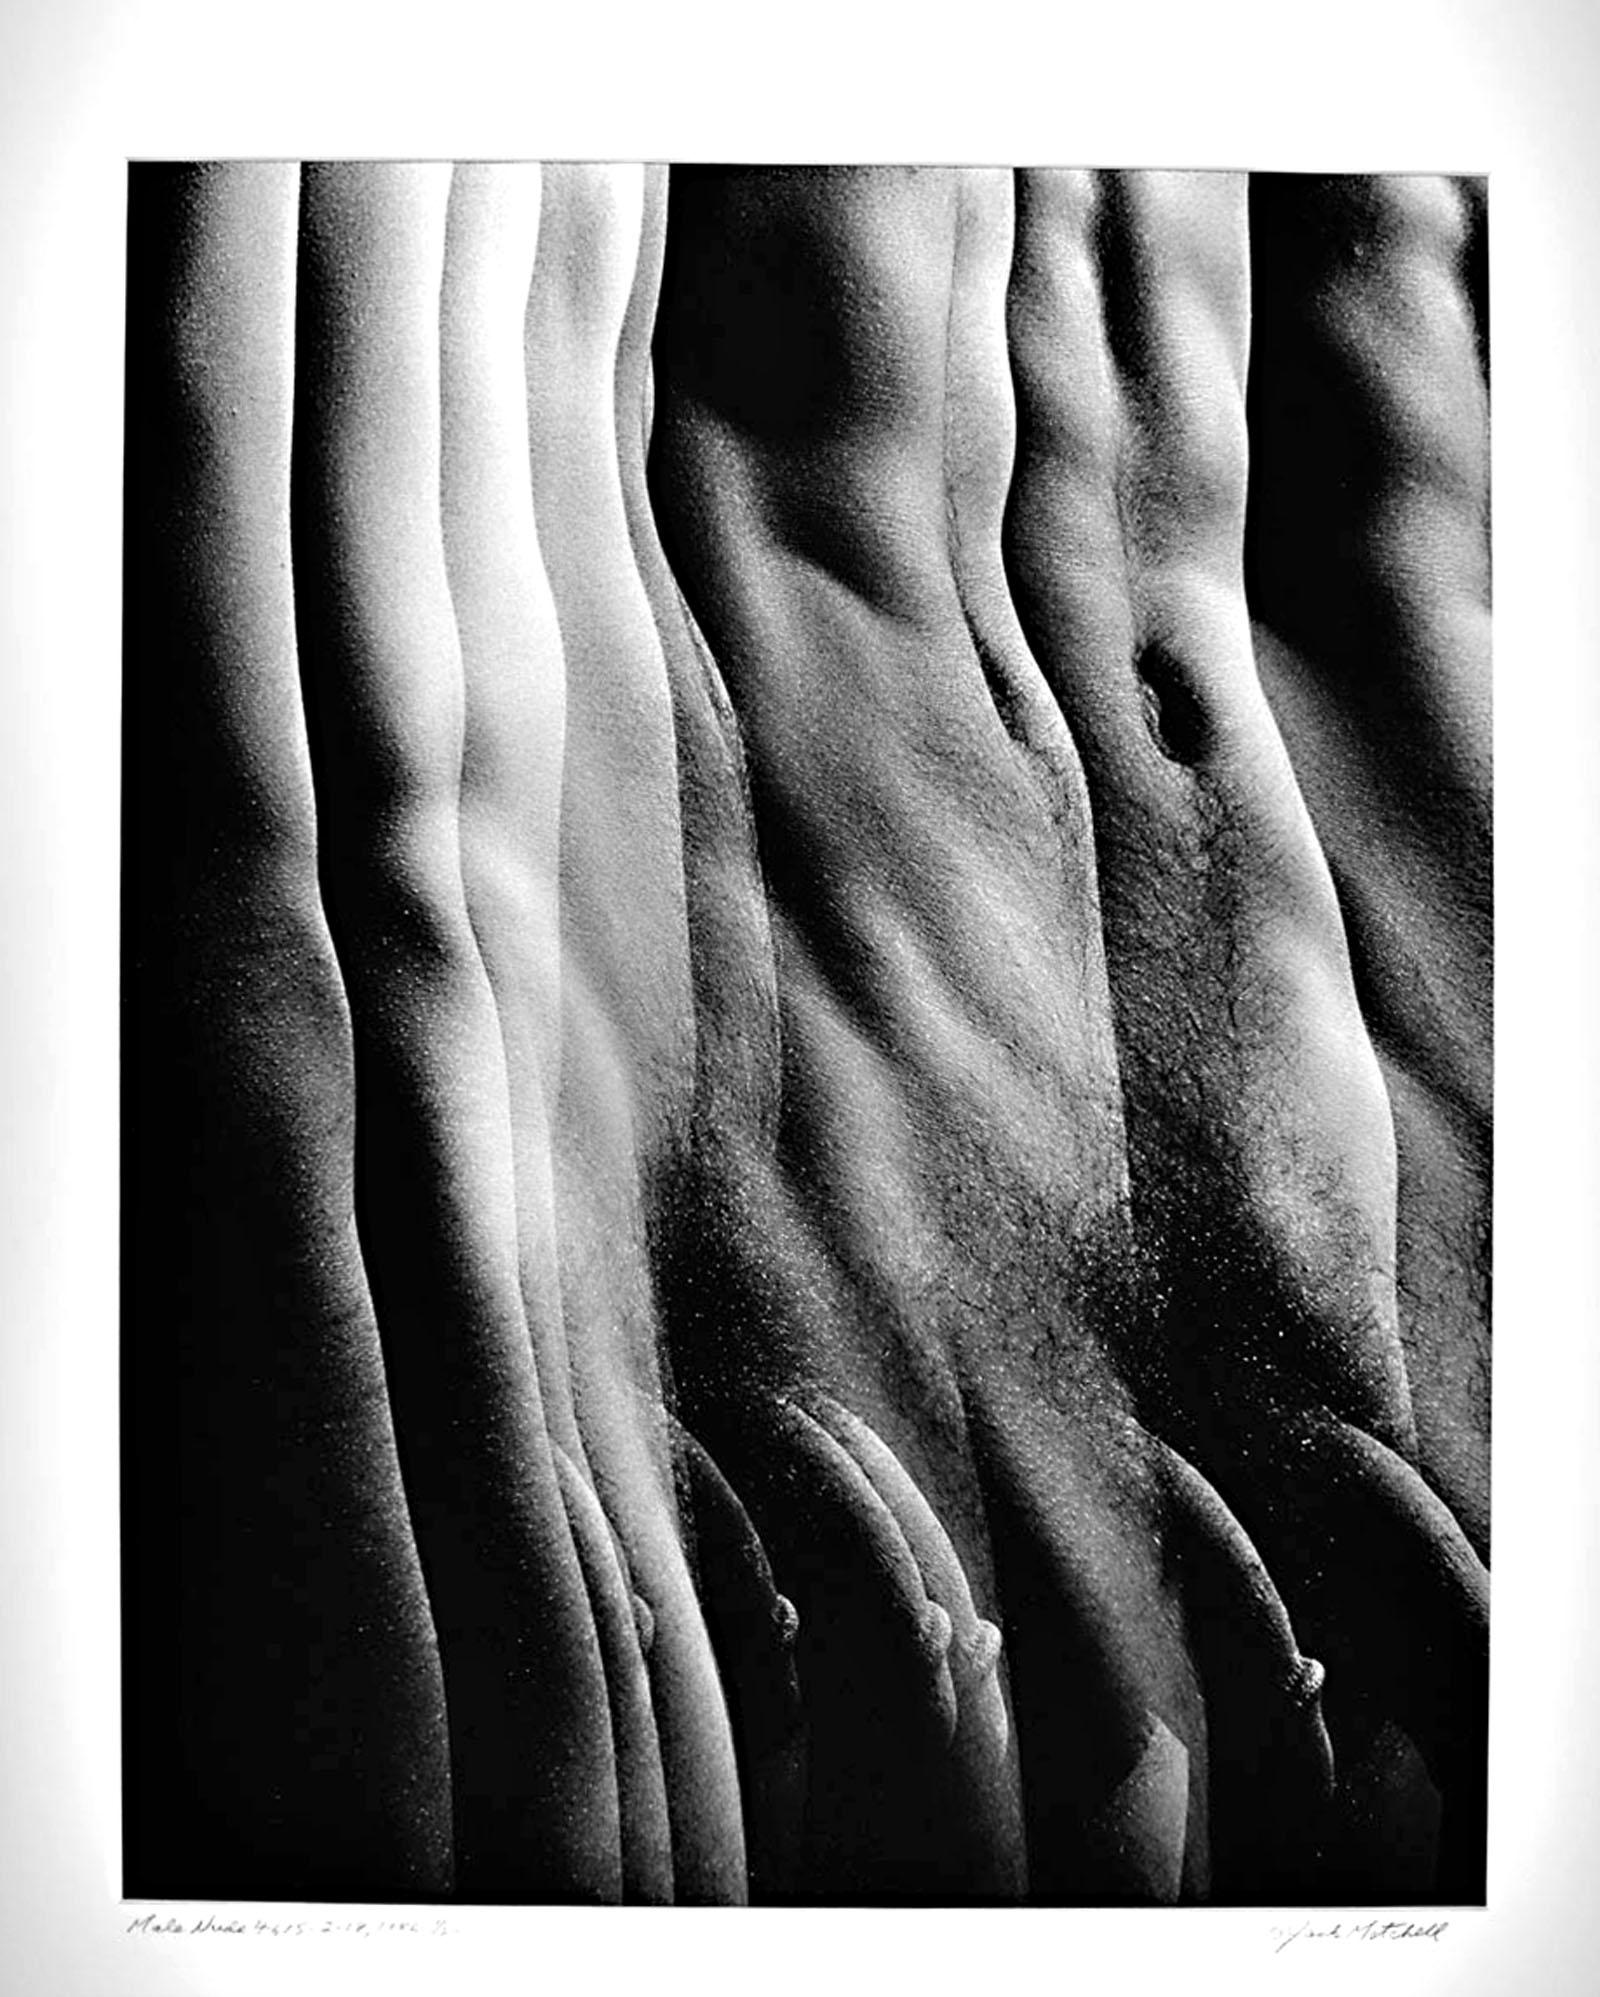 Jack Mitchell Nude Photograph - Male Nude from Numbered Nudes Series, multiple exposure signed exhibition print